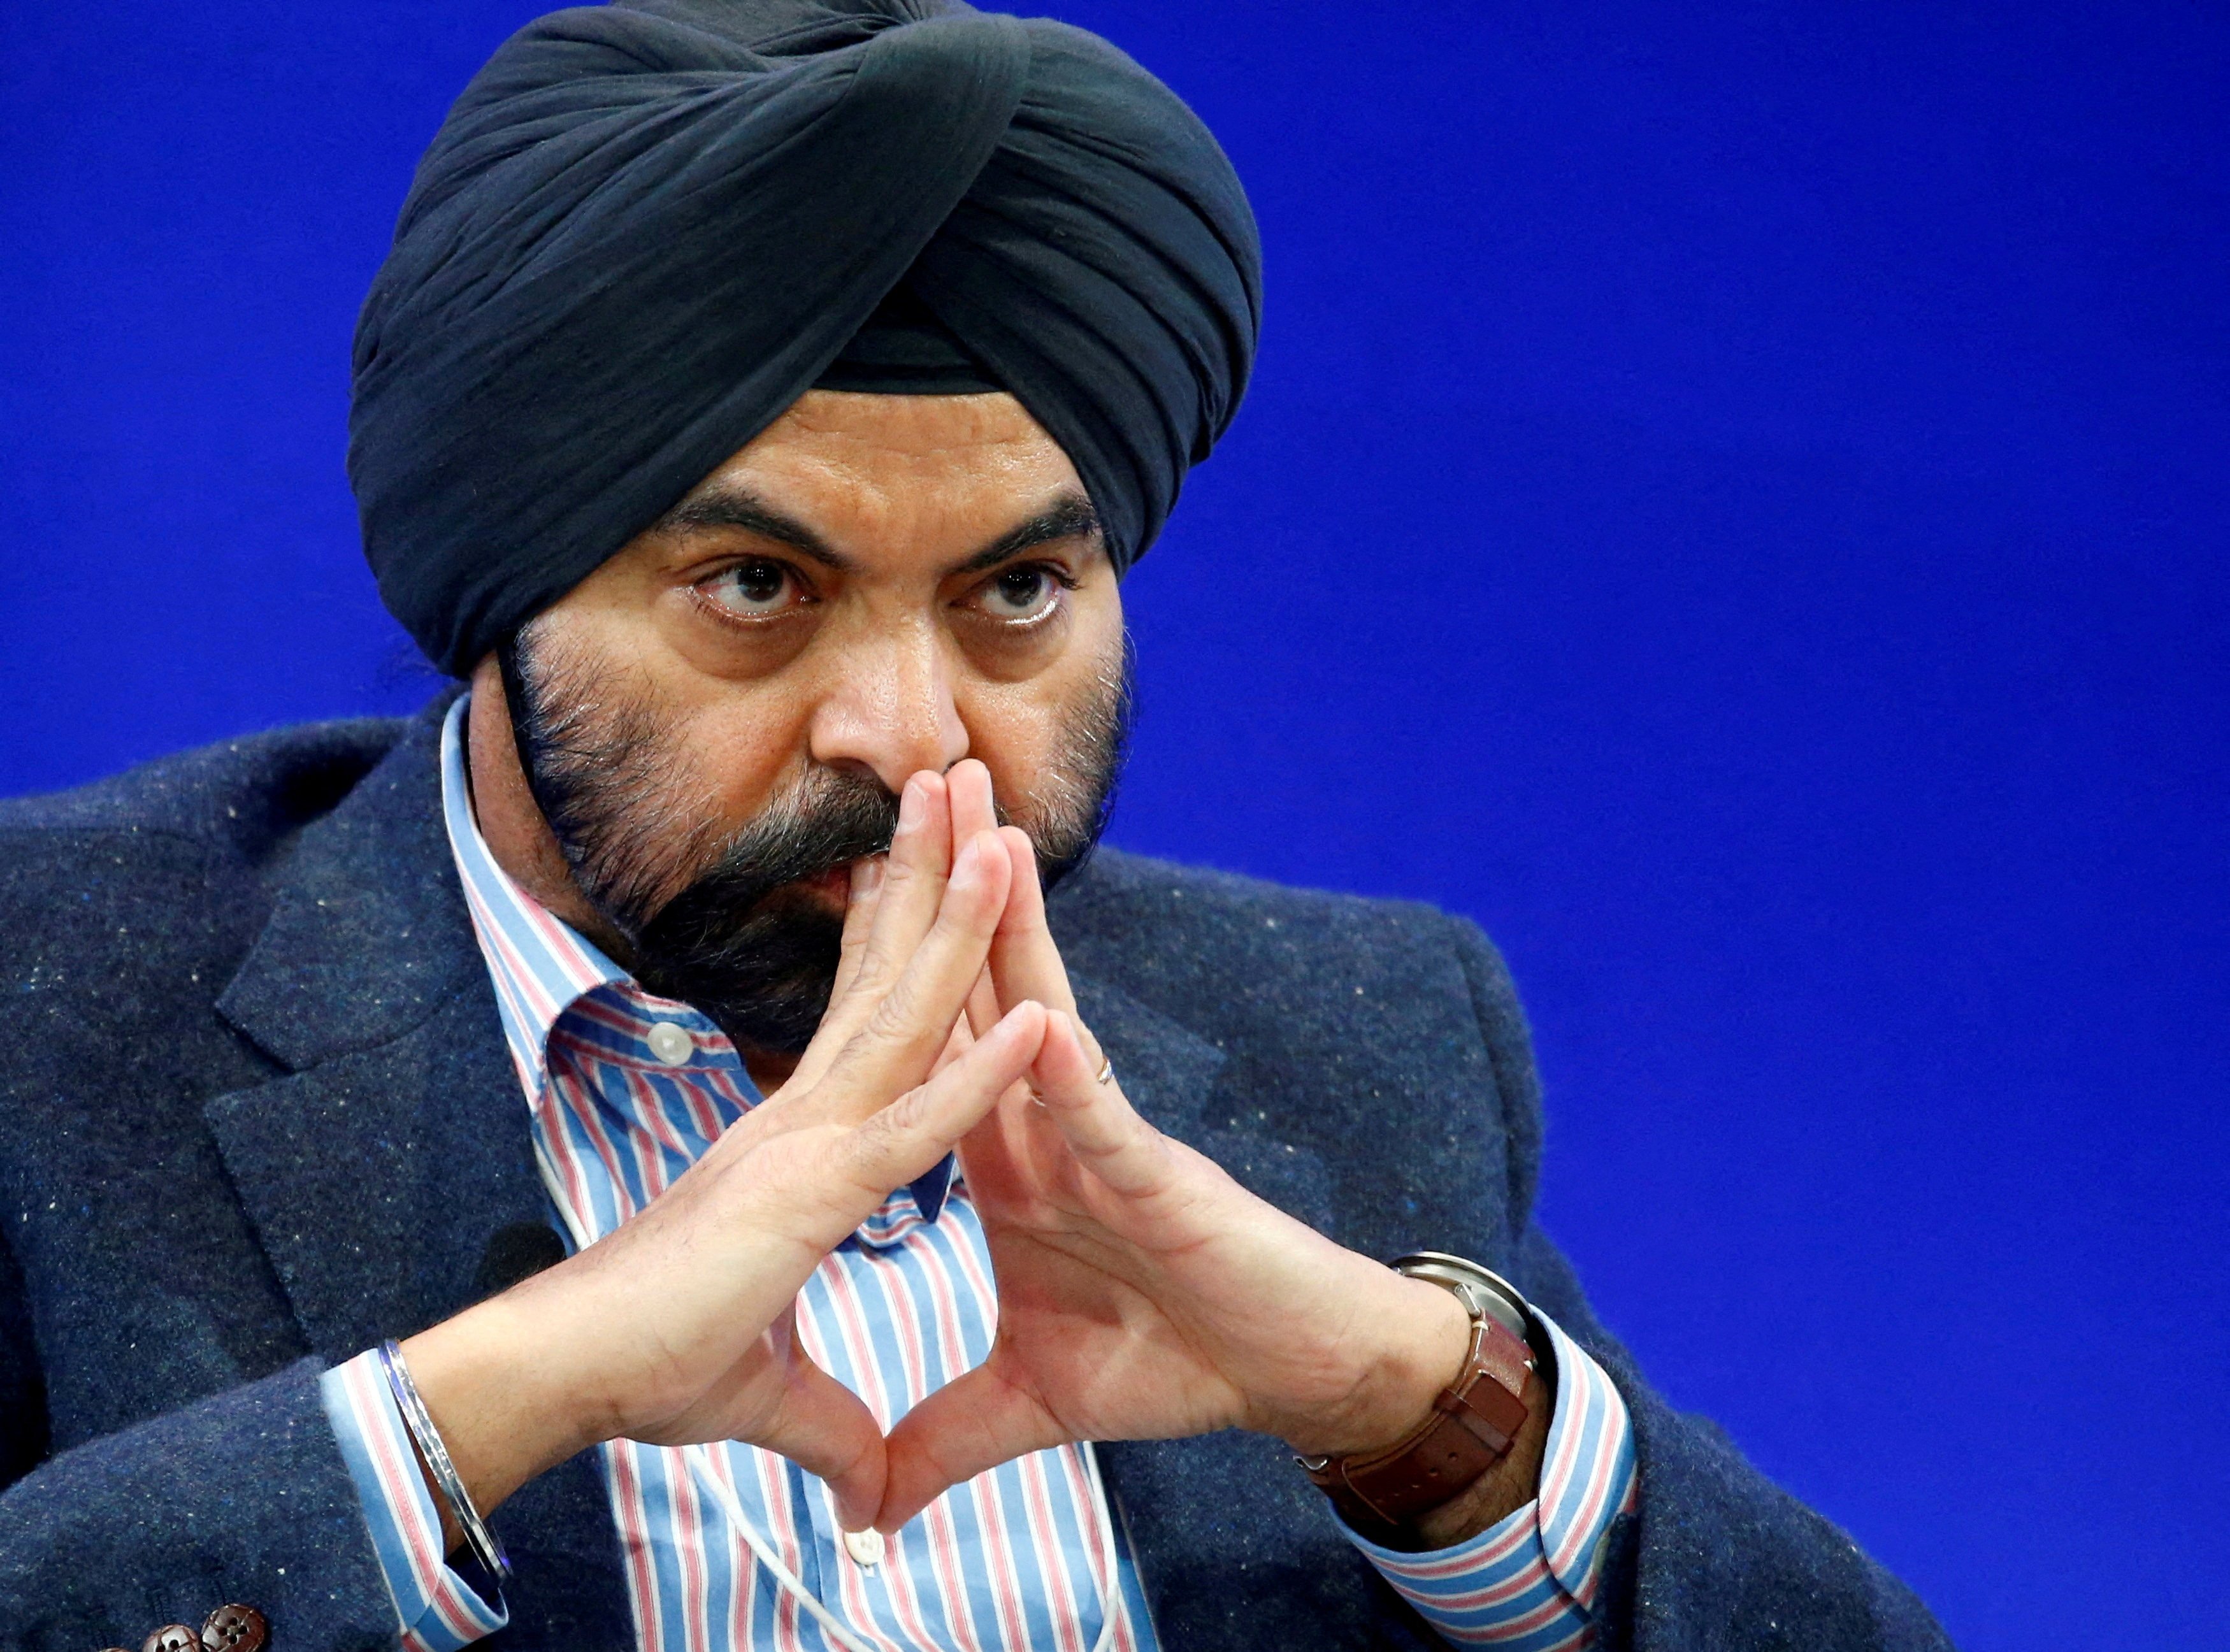 Mastercard CEO Ajay Banga attends the World Economic Forum annual meeting in Davos, Switzerland in January 2017. Photo: Reuters